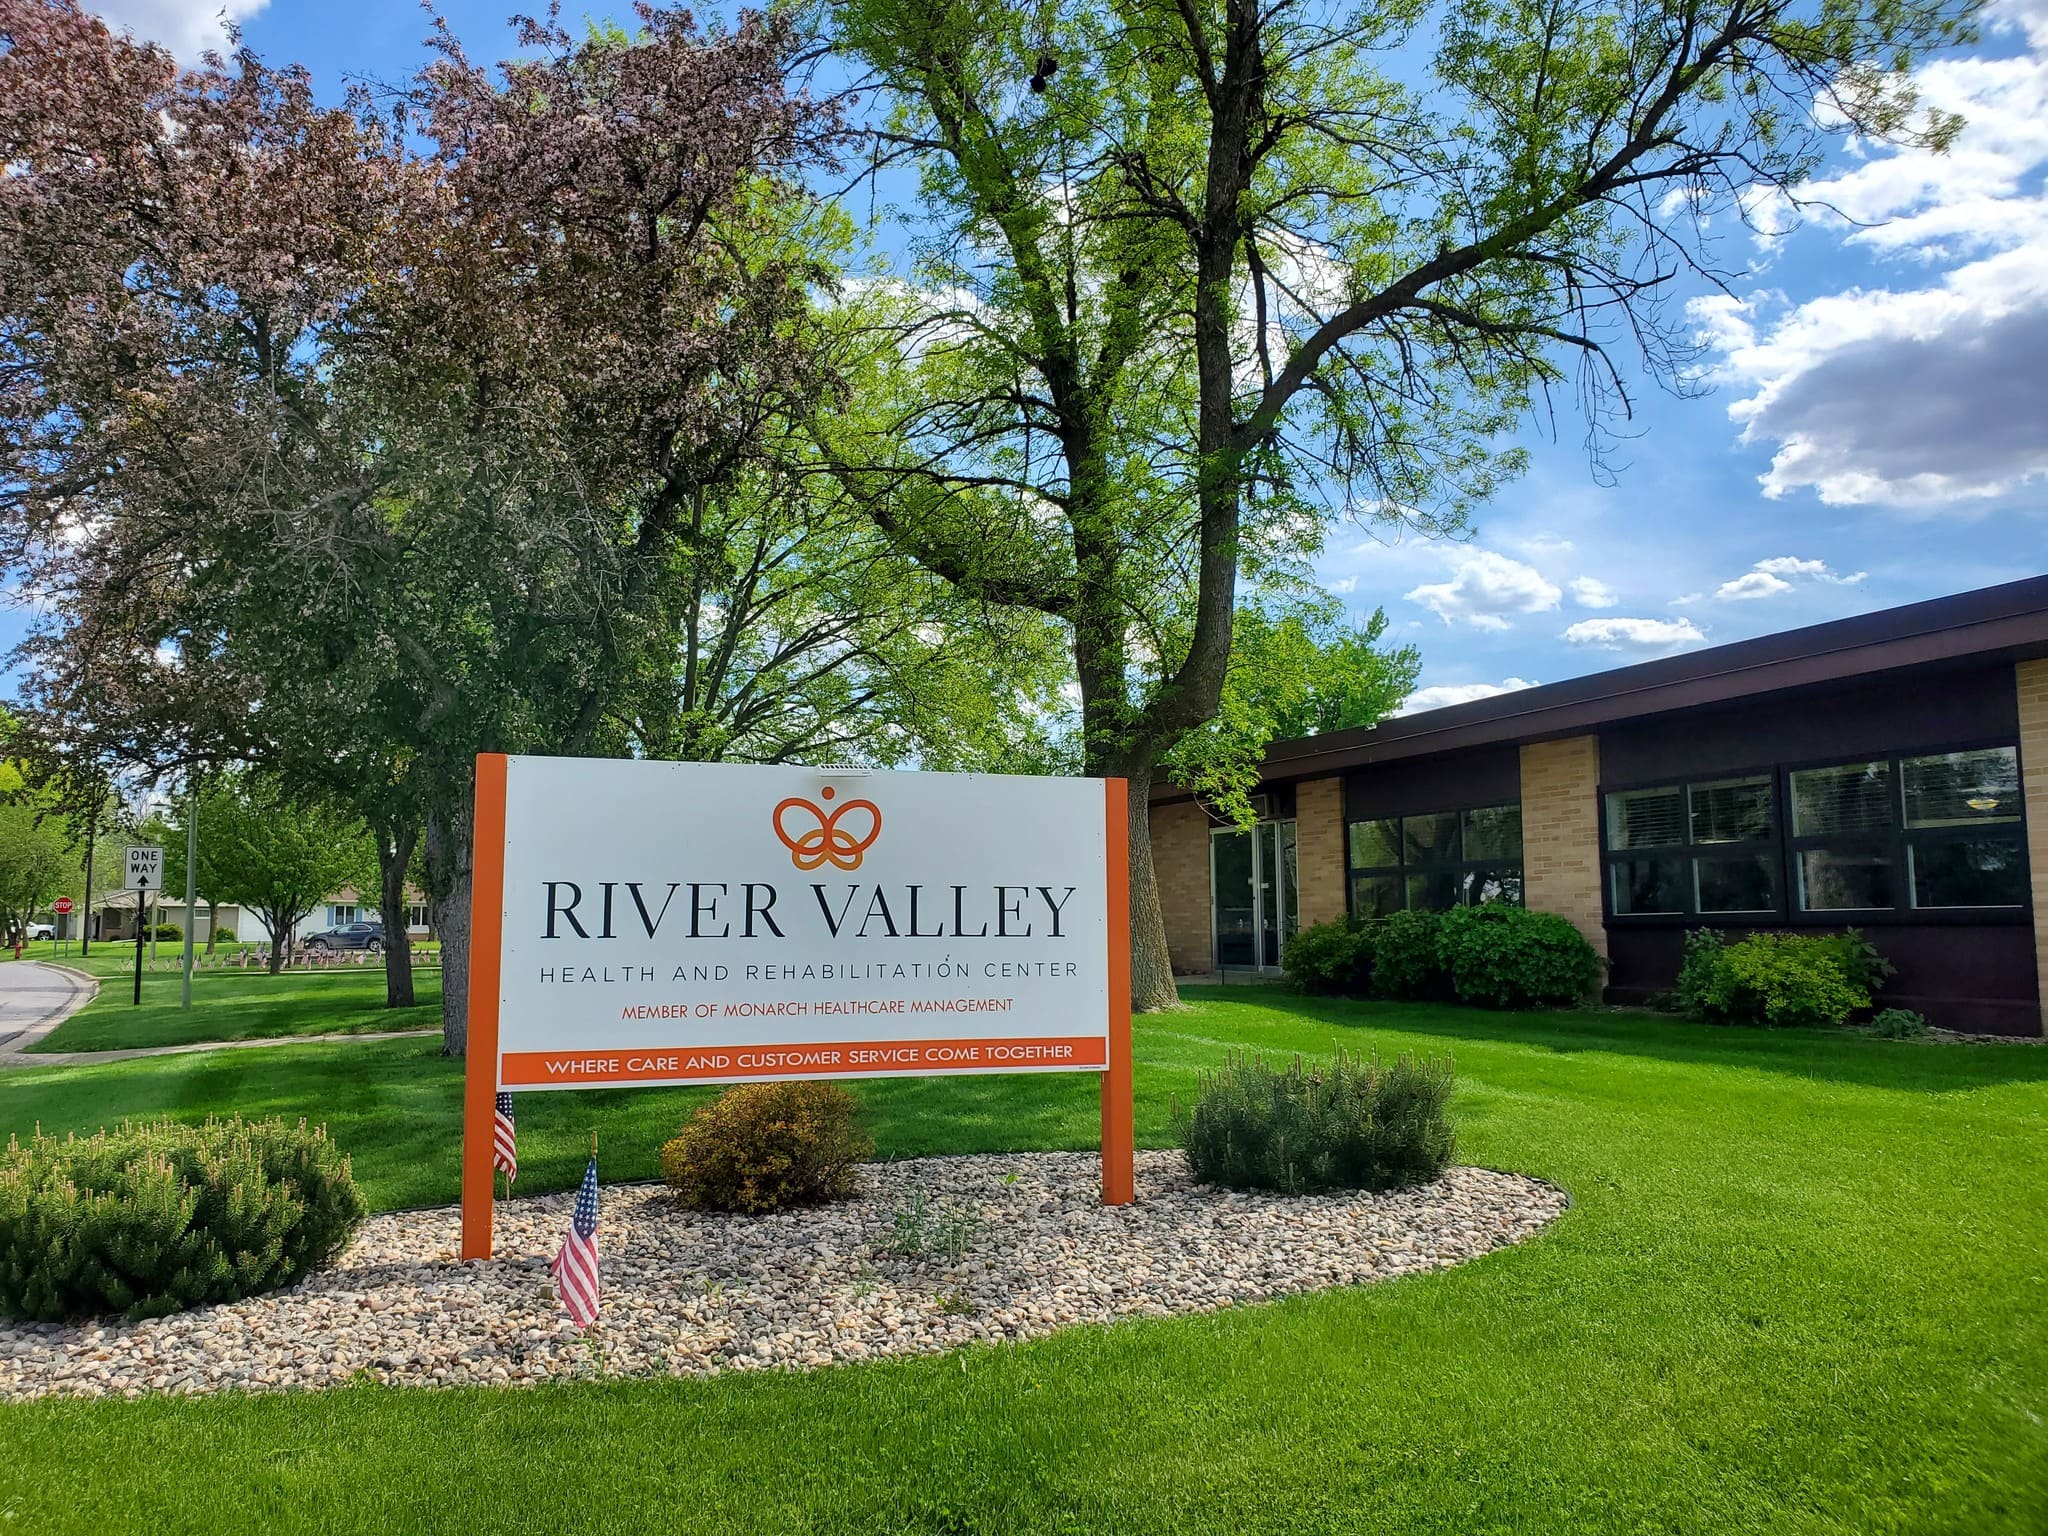 River Valley Health and Rehabilitation